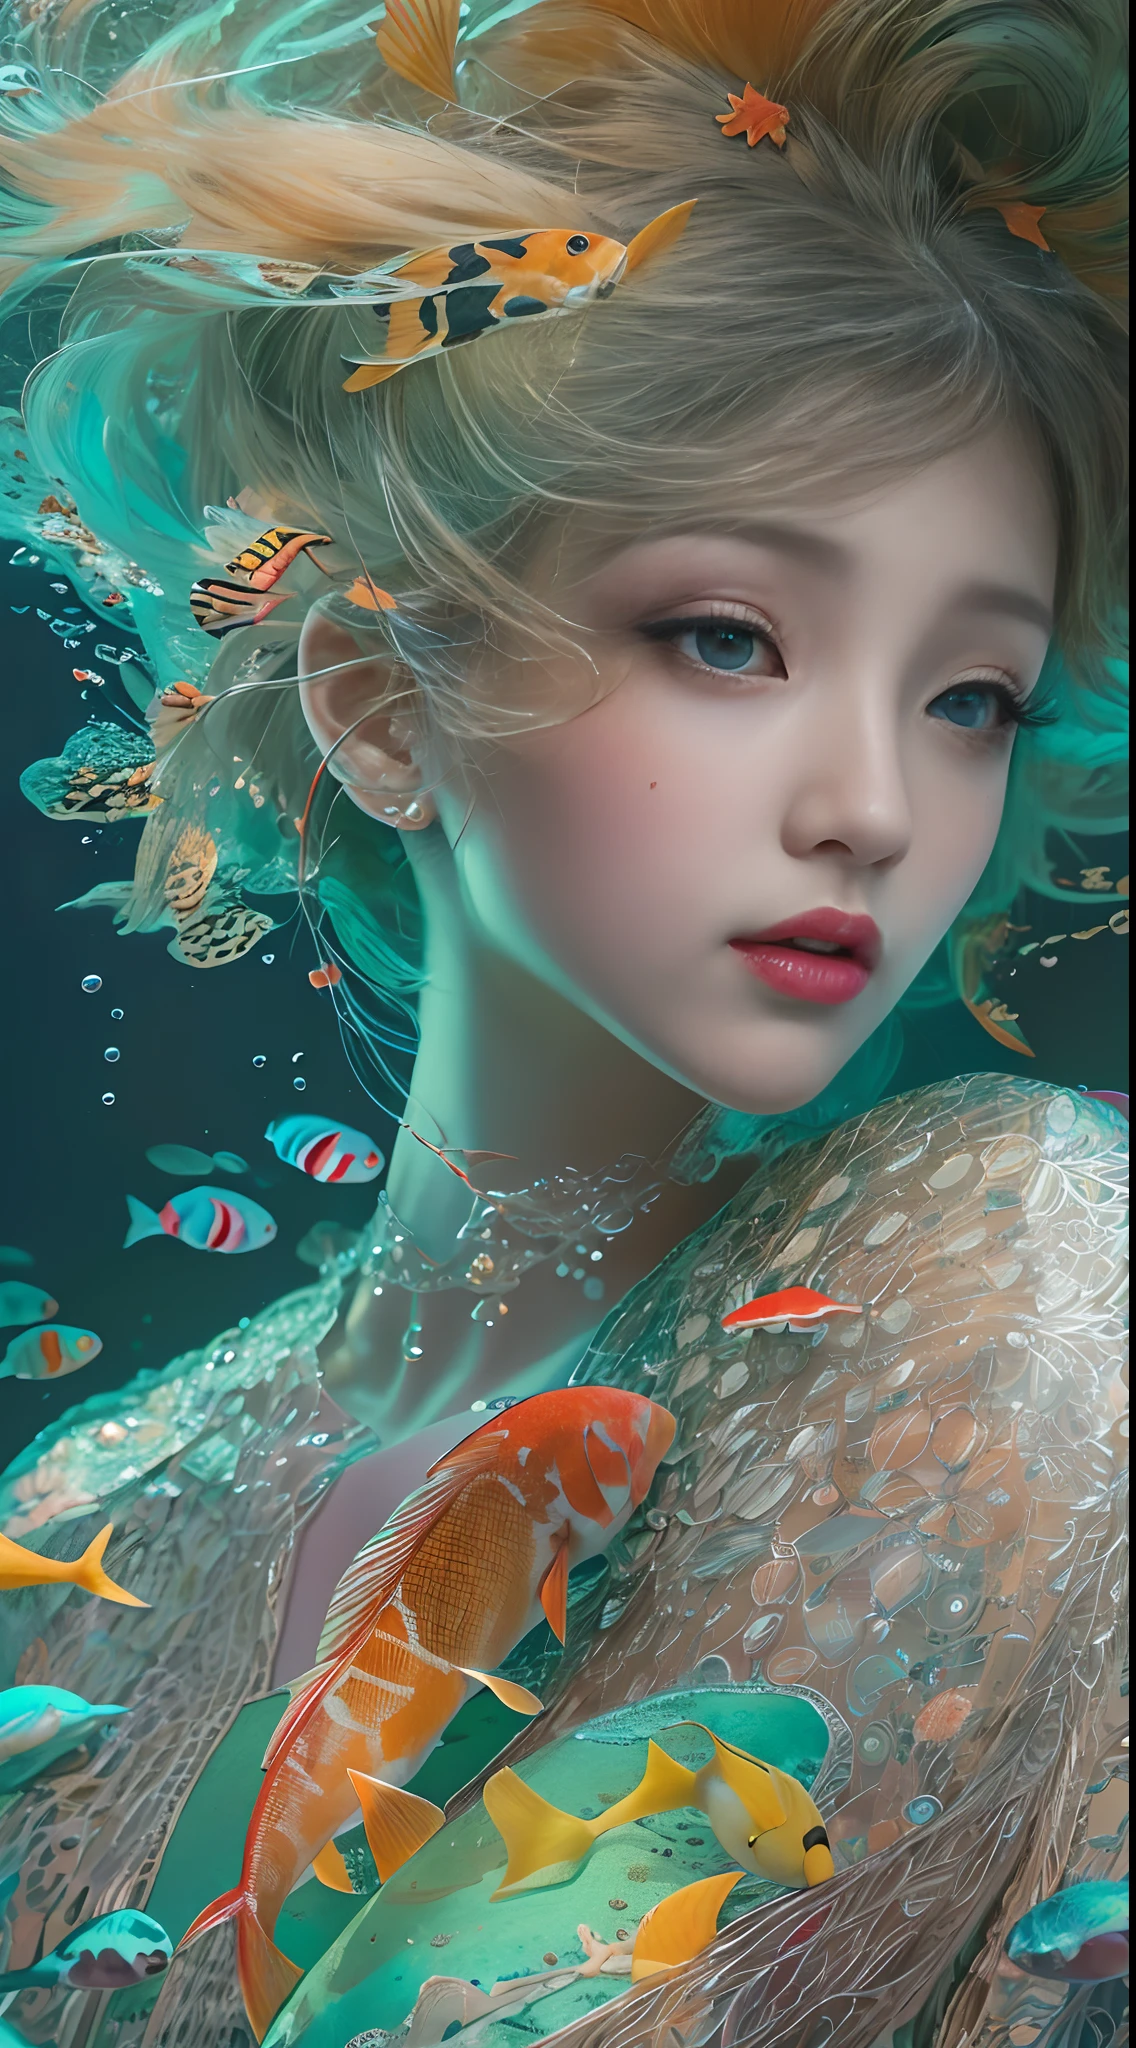 ModelShoot style, (Extremely detailed Cg Unity 8K wallpaper), A chaotic storm of intricate liquid smoke in the head, Stylized abstract portrait of beautiful girl, wetted skin,Koi，Beautiful koi，Flocks of koi,carp，Strange shaped corals，ocean floor，Beautiful coral reef in the background，Rochas,Marine life，colorful coral reef,author：Petros Afshar, ross tran, tom whalen, Peter Mohrbacher, Art germ, Broken glass, ((bubbly underwater scenery)) Radiant light octane rendering is highly detailed, inspired by Yanjun Cheng, Beautiful digital artwork, Guviz-style artwork, 4k highly detailed digital art, Beautiful digital illustration, Cute detailed digital art, stunning digital illustration, A beautiful artwork illustration, Exquisite digital illustration, 4K detailed digital art,
waiting to start